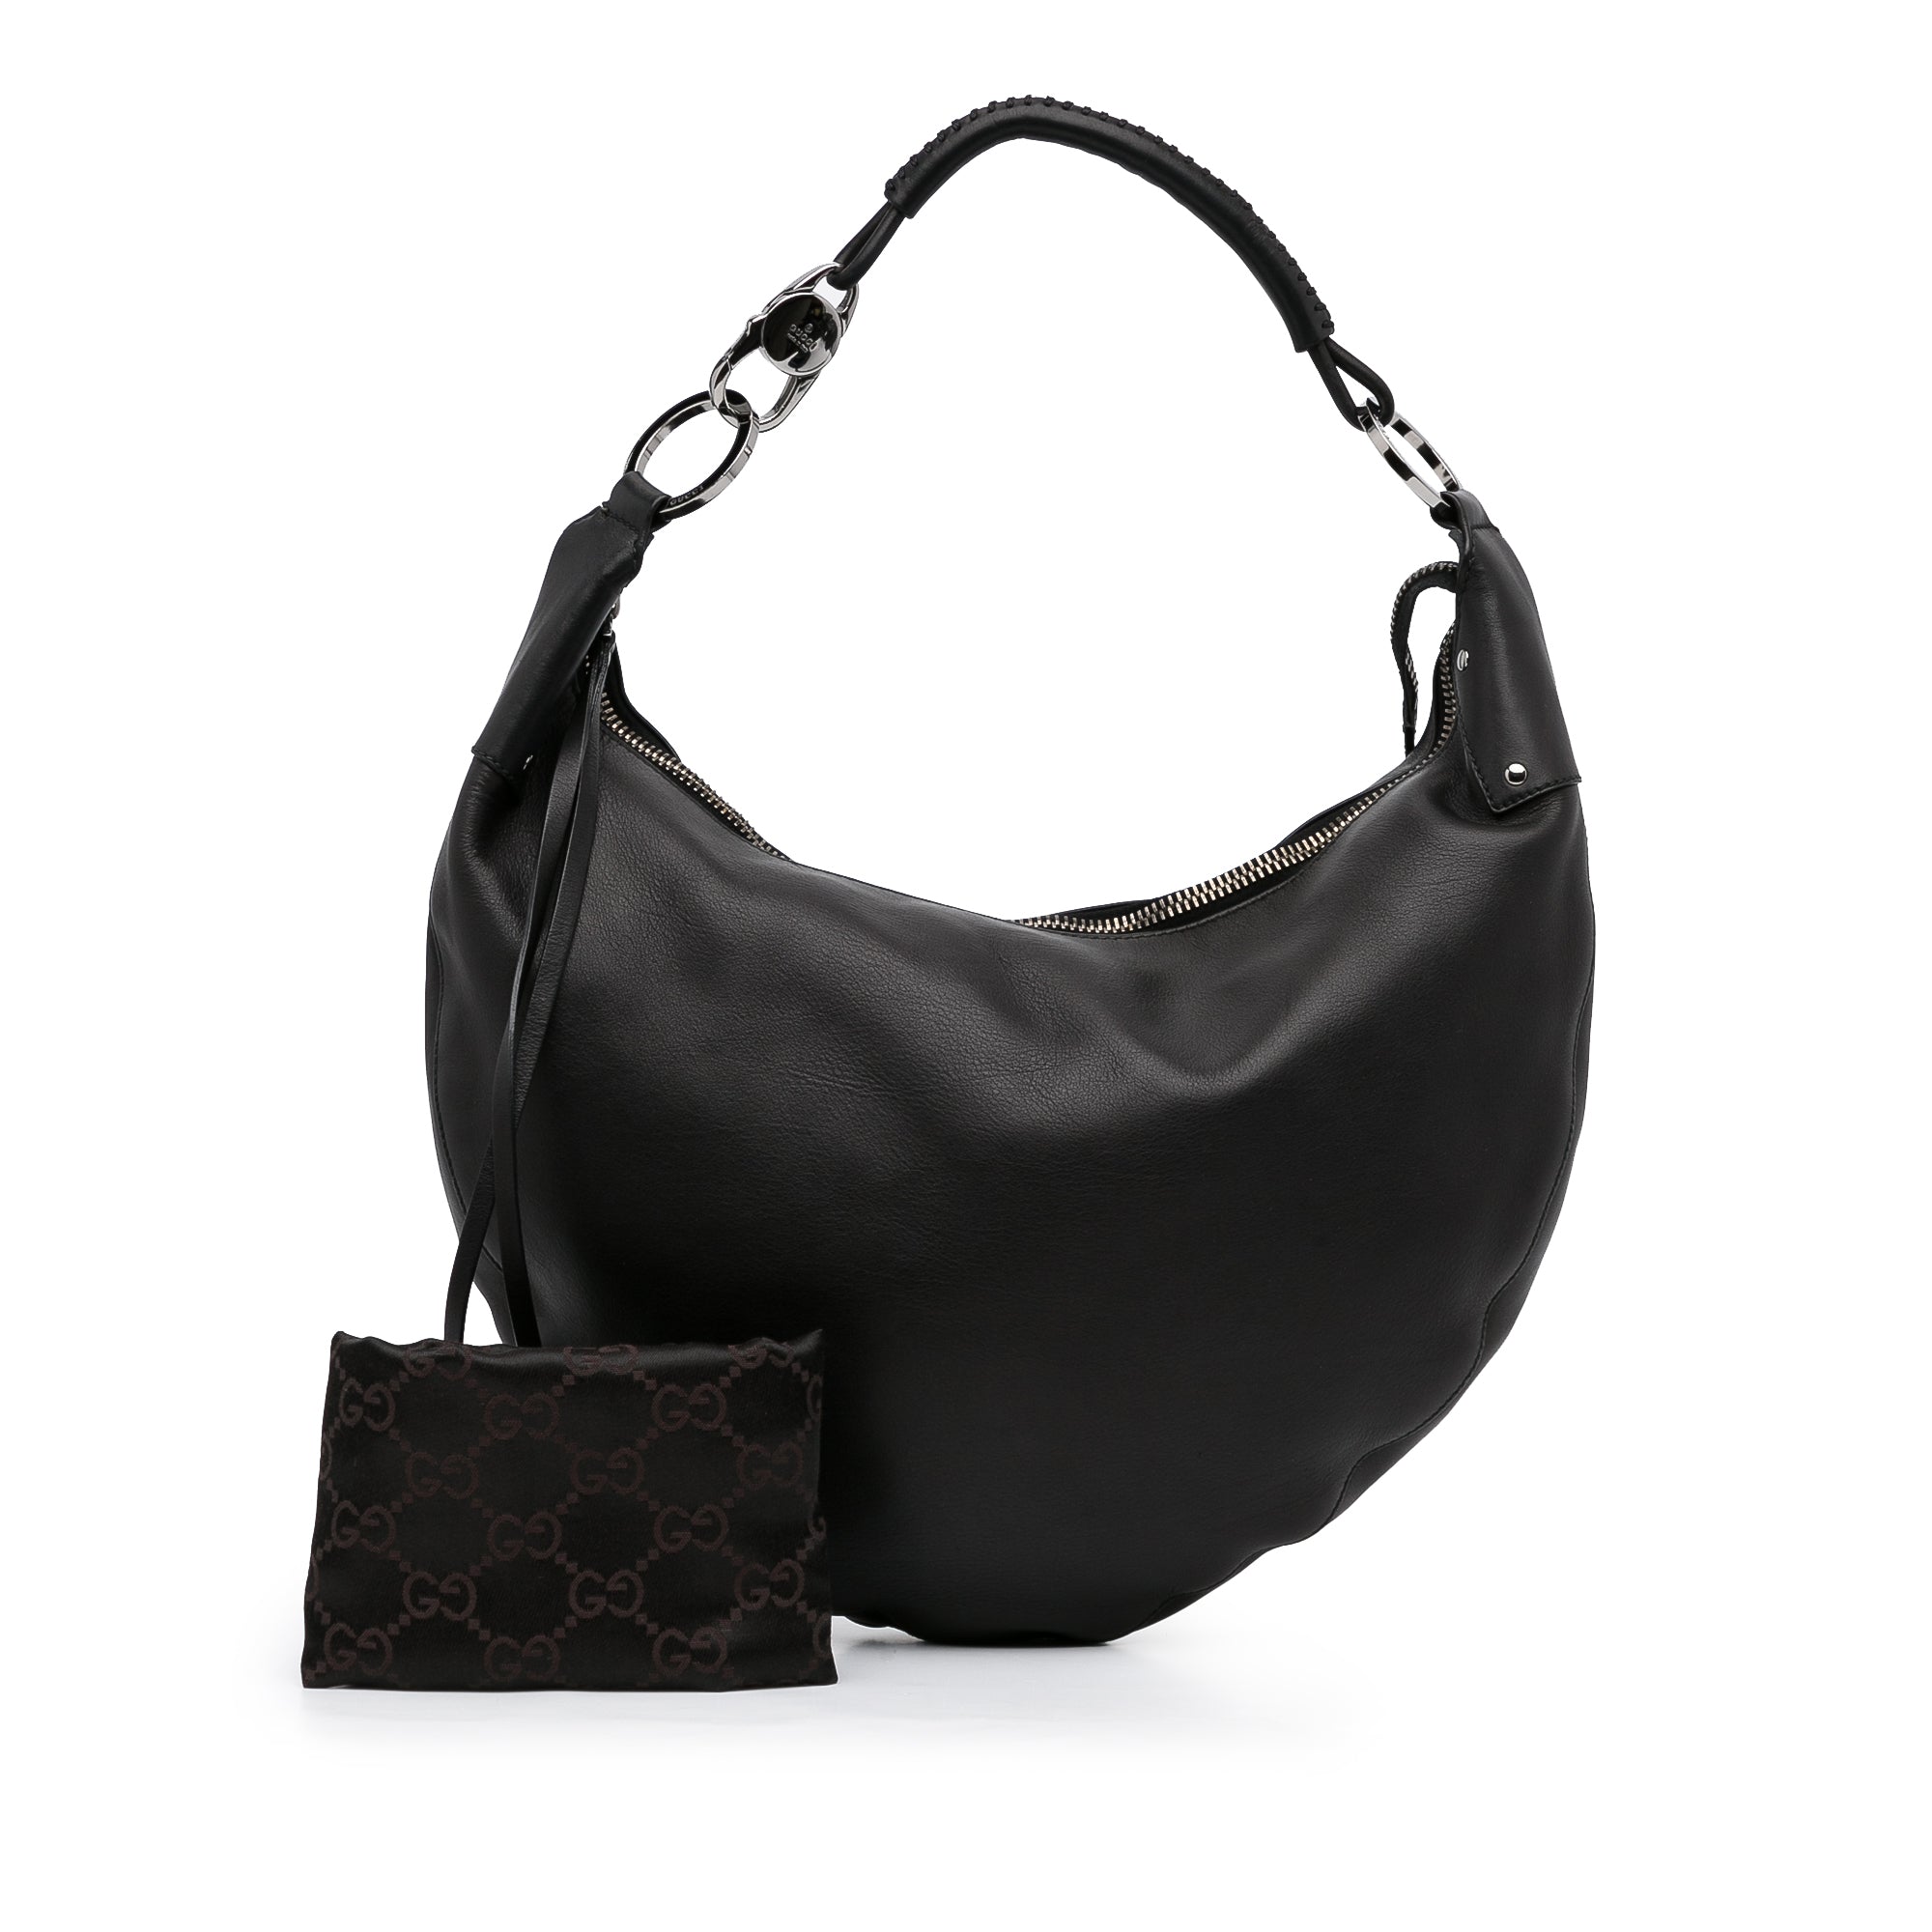 Gucci Half-Moon Hobo Bag In White and Black